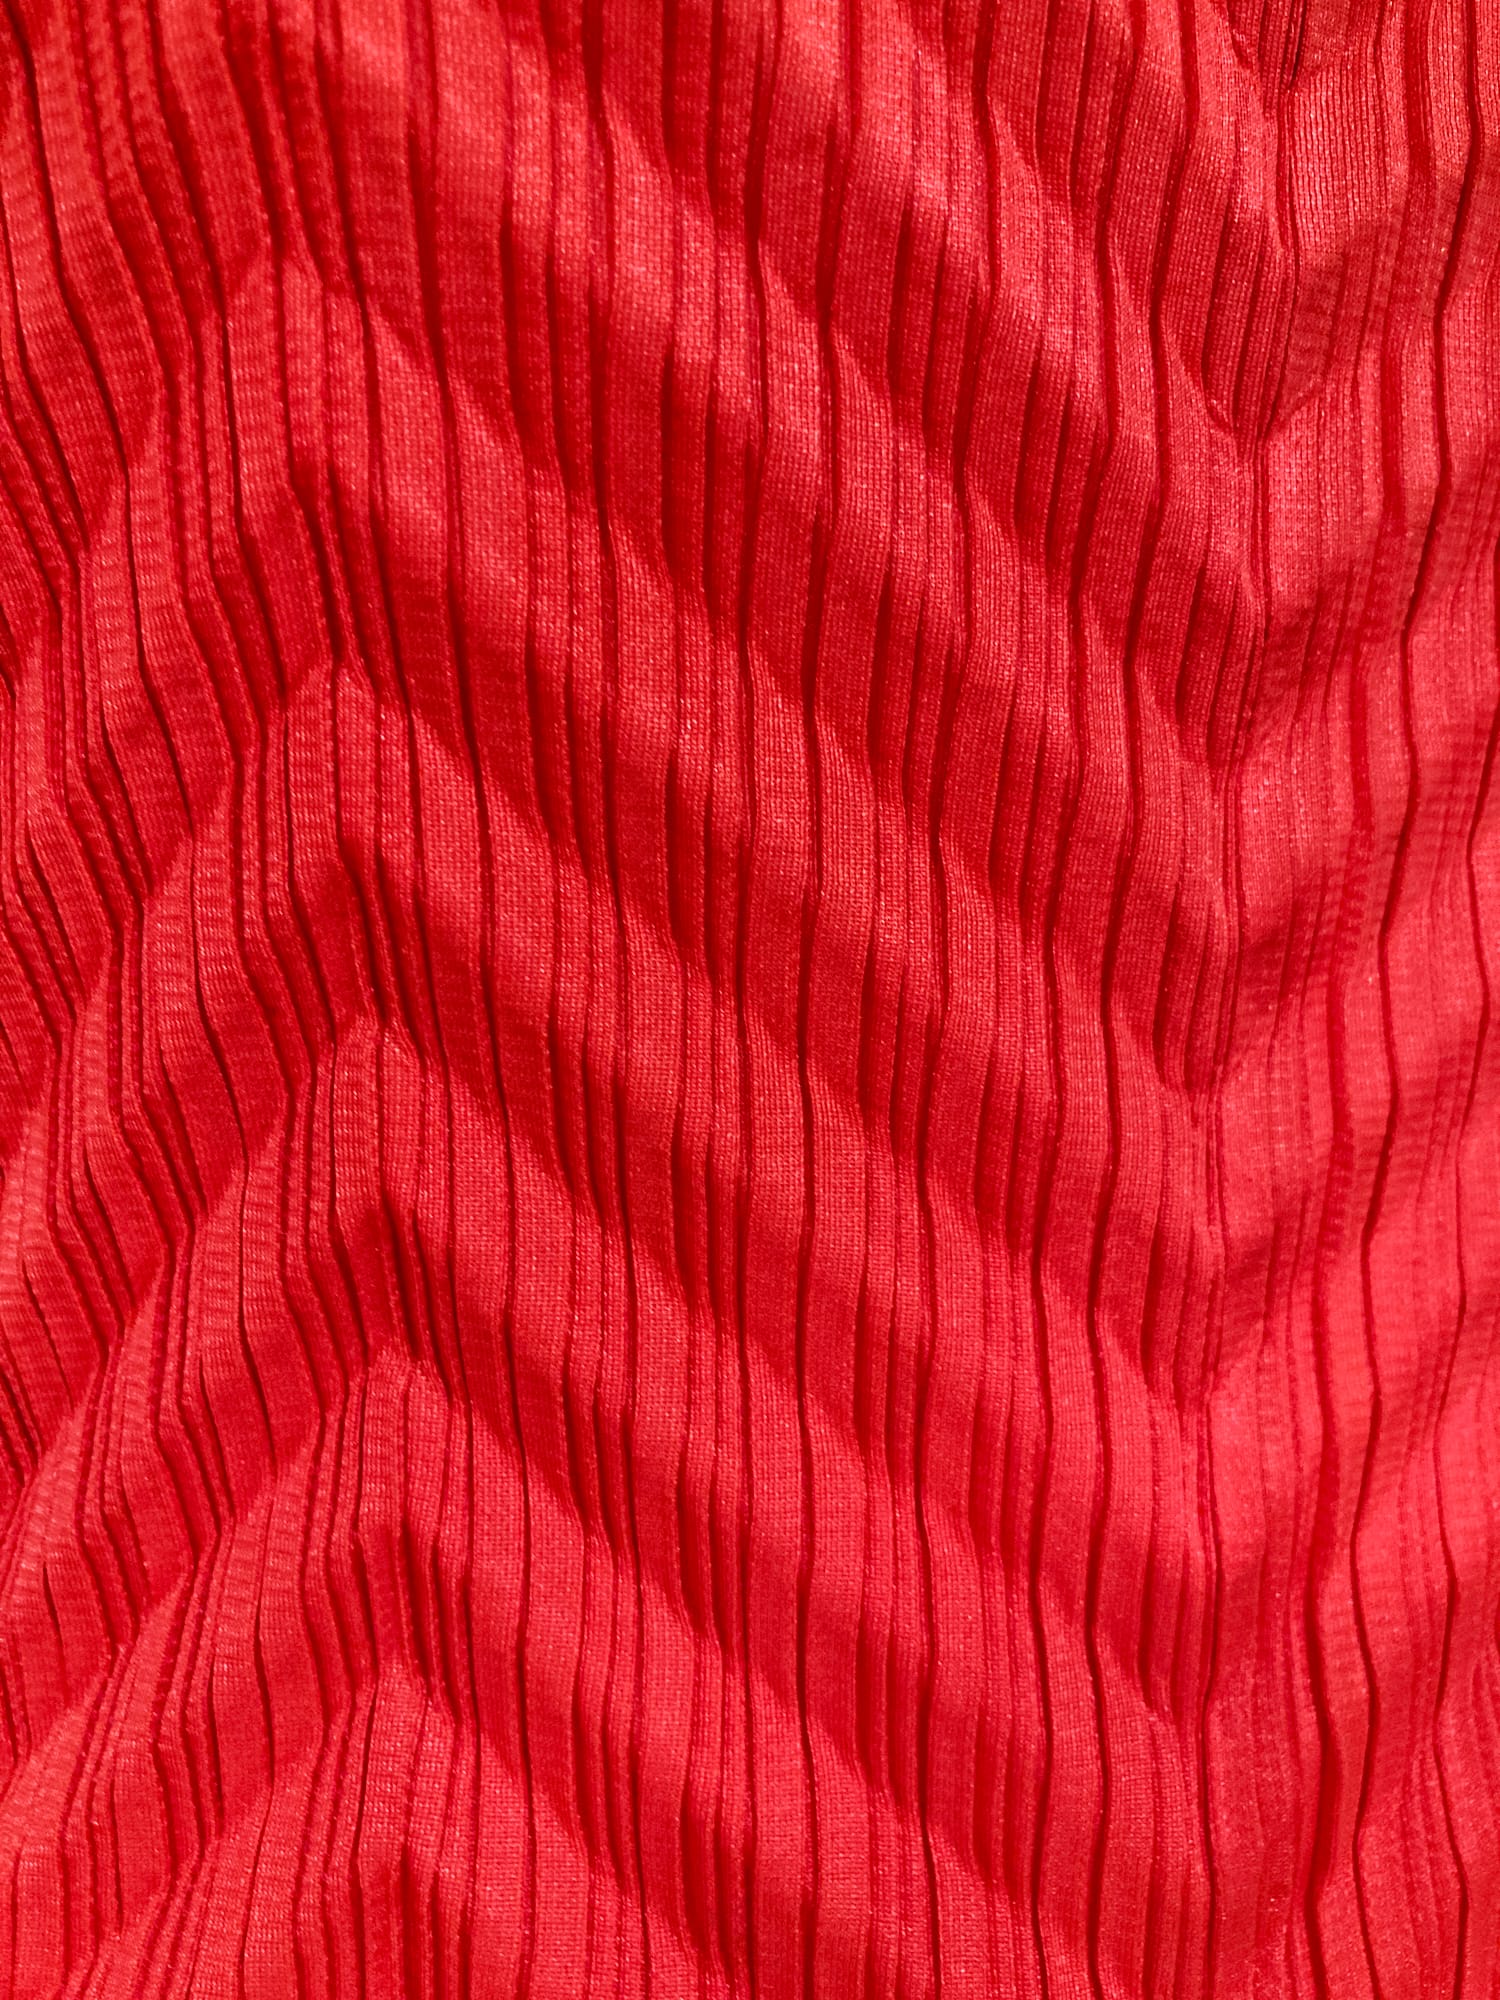 Wrinqle Inoue Pleats red pleated polyester singlet